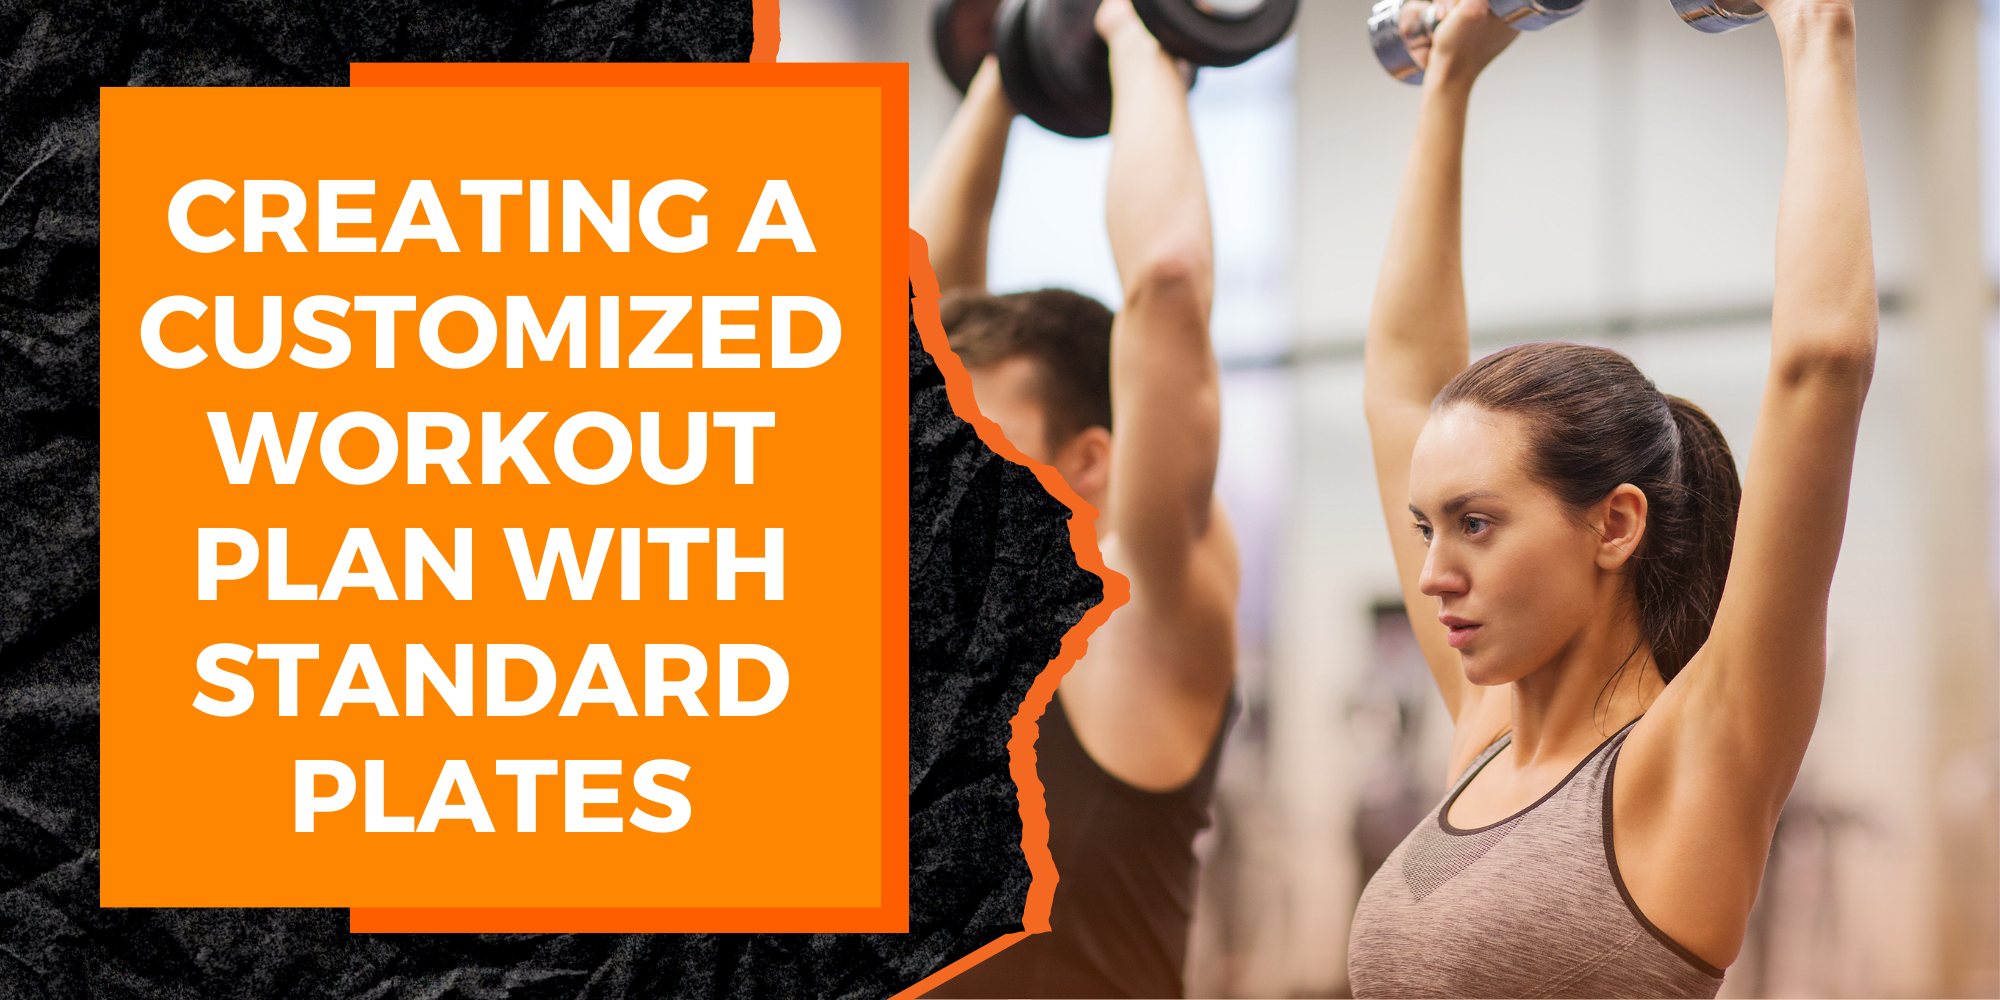 How to Create a Customized Workout Plan with Standard Weight Plates